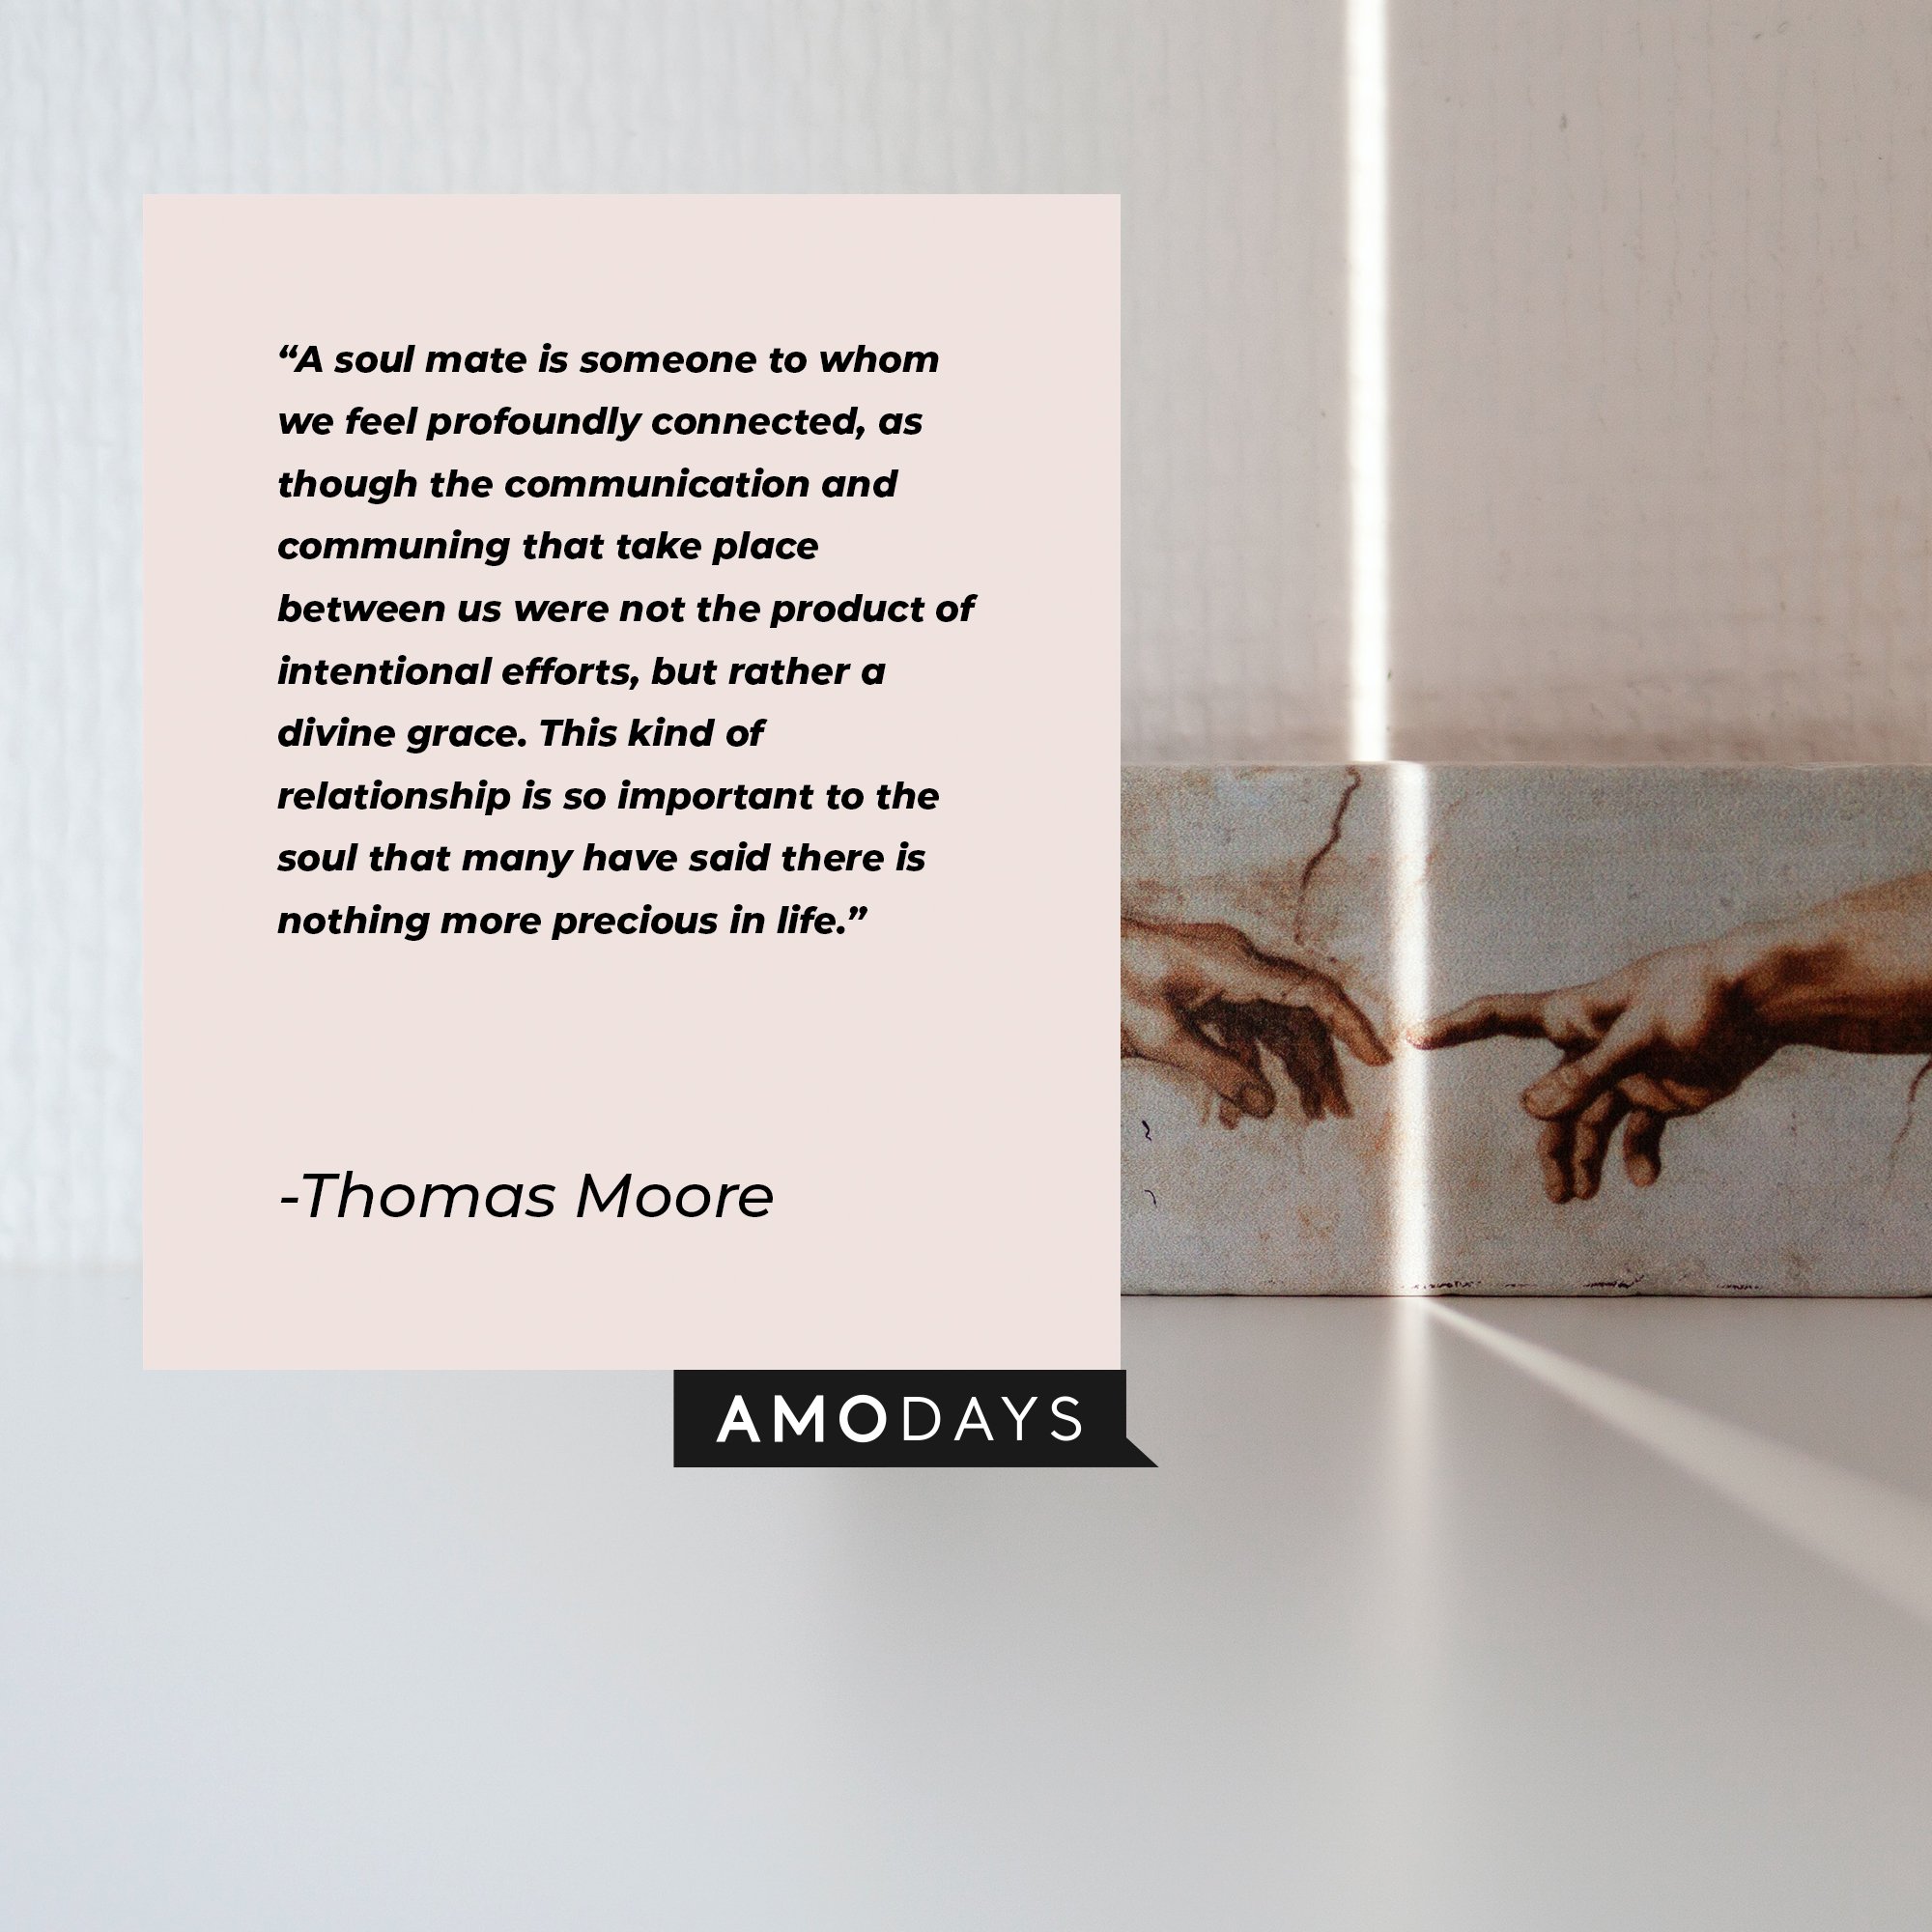 Thomas Moore's quote: “A soul mate is someone to whom we feel profoundly connected, as though the communication and communing that take place between us were not the product of intentional efforts, but rather a divine grace. This kind of relationship is so important to the soul that many have said there is nothing more precious in life.” | Image: AmoDays   